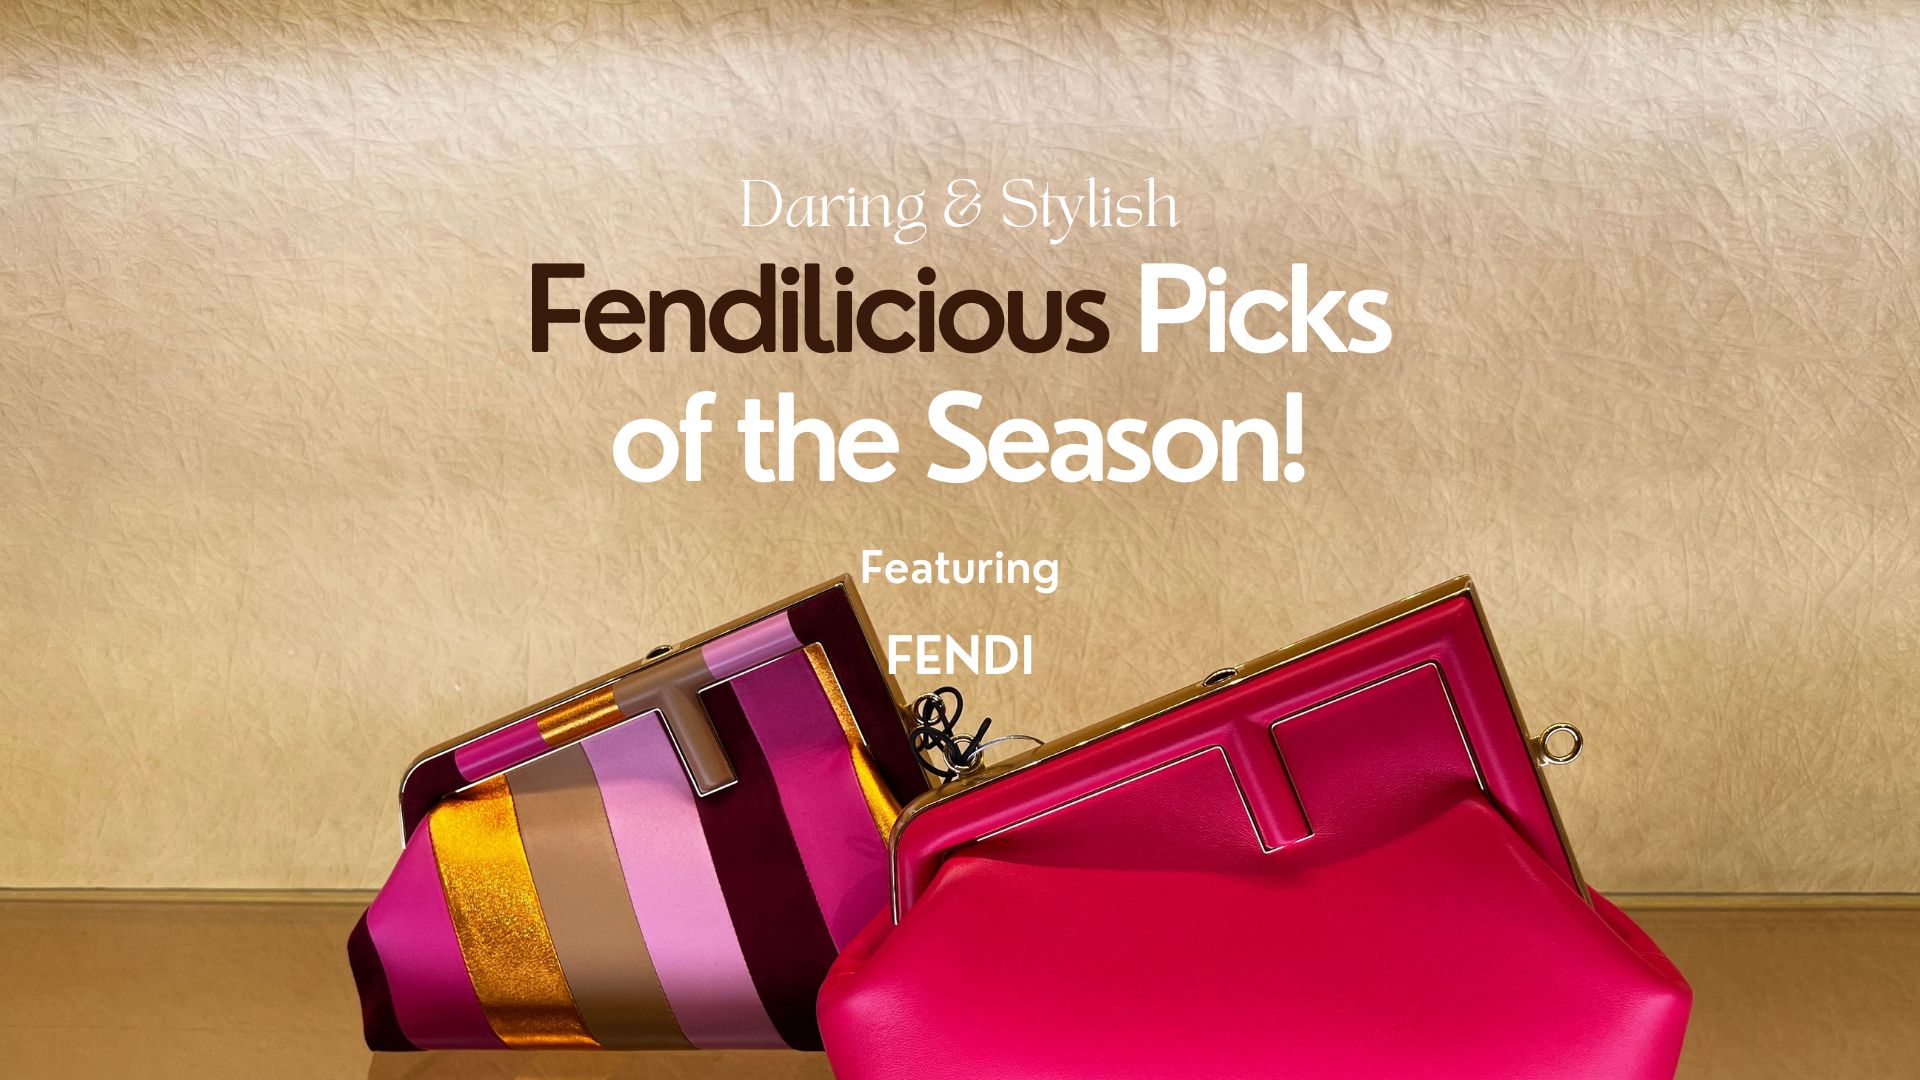 Read more about the article Daring & Stylish Fendilicious Picks- Featuring Fendi Bags